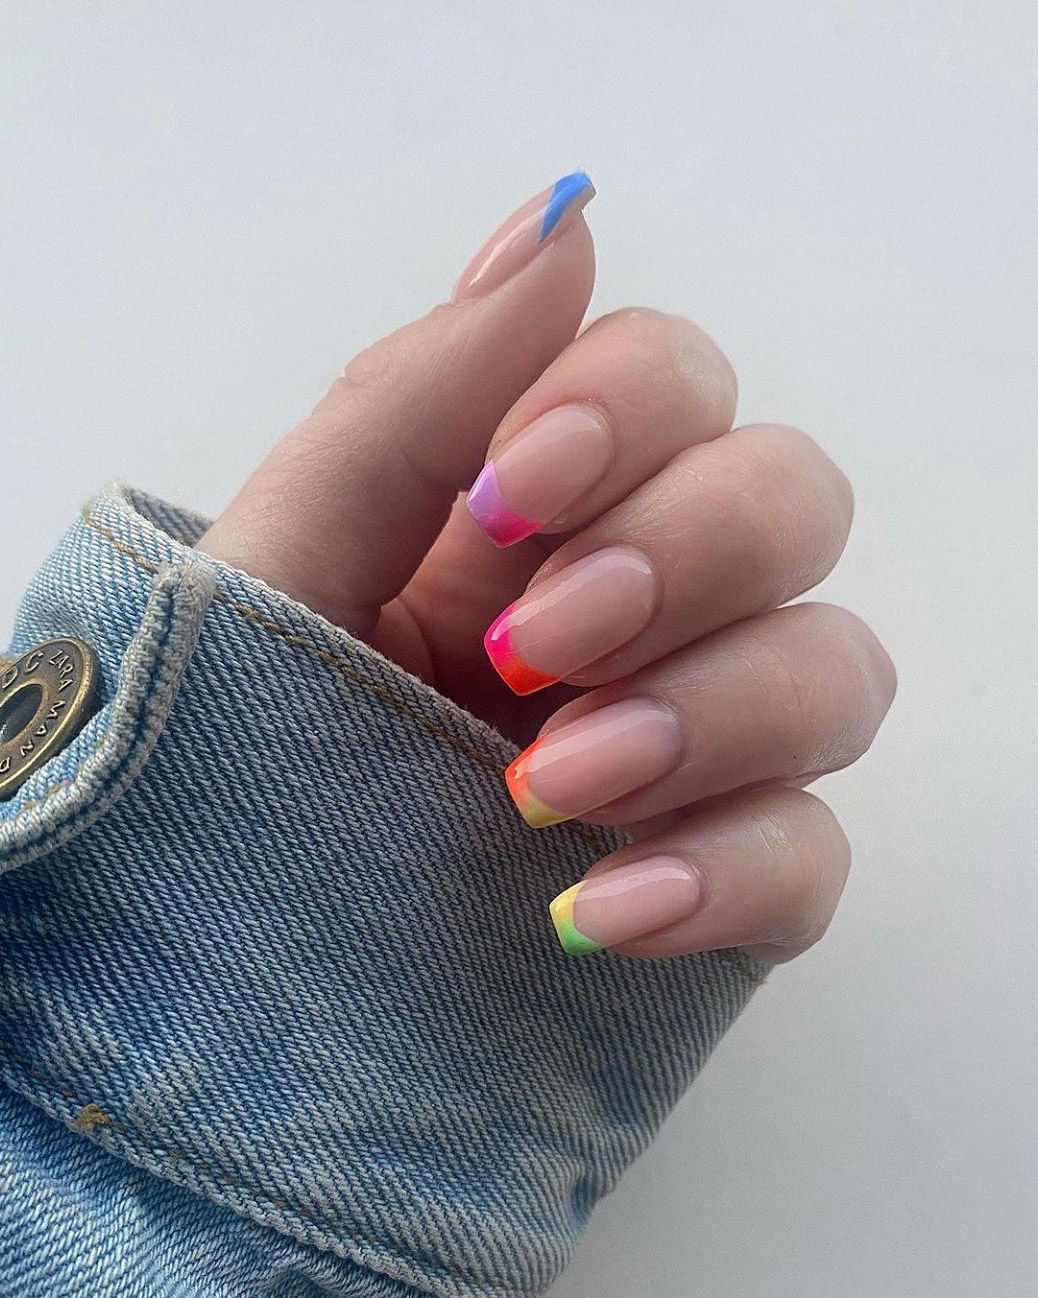 The Best Nail Salons In Sydney For Your Party Season Prep | Urban List  Sydney